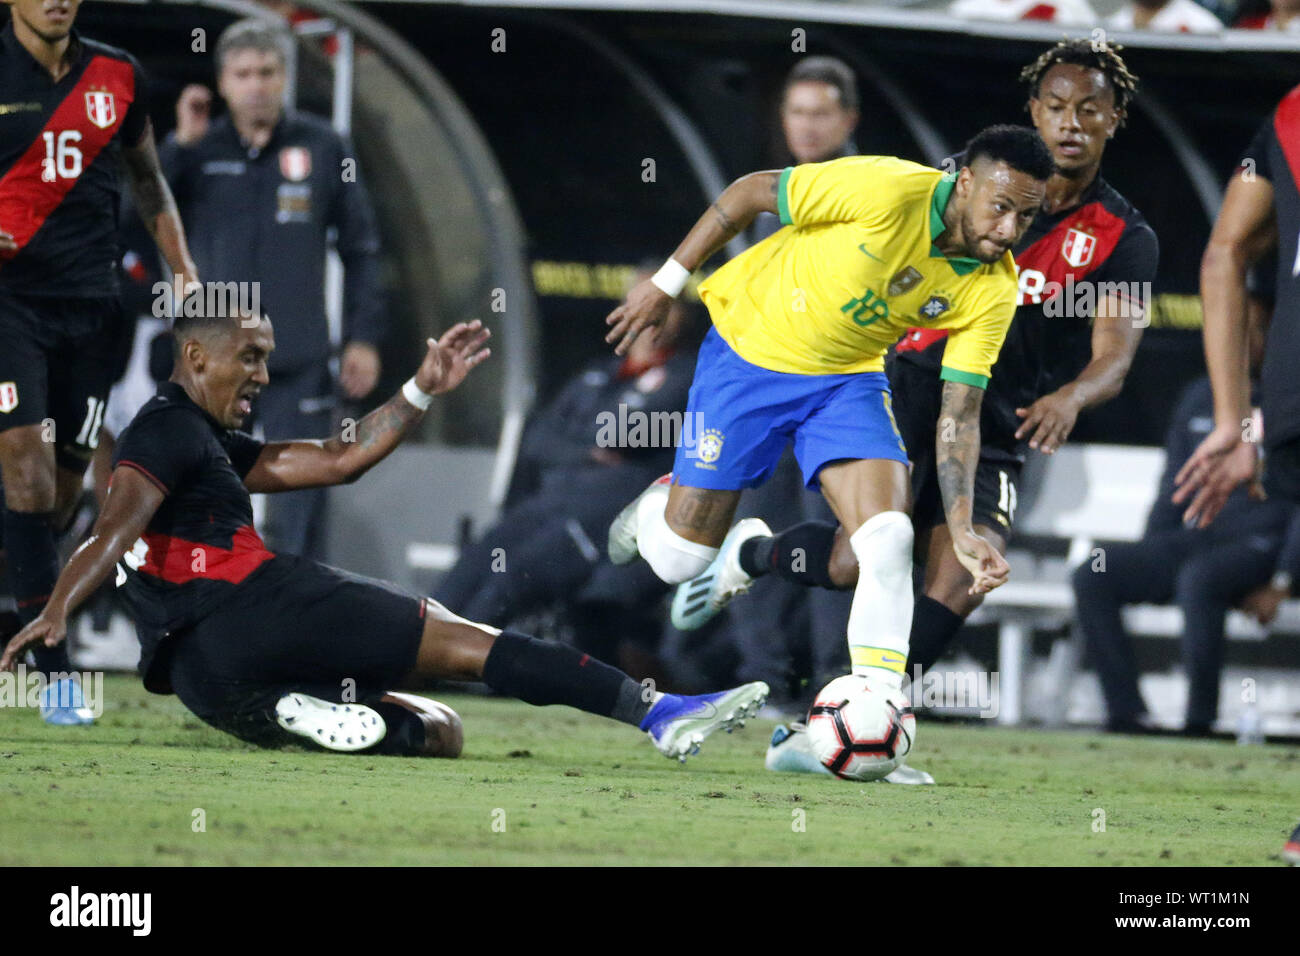 Los Angeles, California, USA. 10th Sep, 2019. Brazil forward Neymar Jr. (10) vies the ball past Peru midfielder Renato Tapia (13) during an International Friendly Soccer match between Brazil and Peru at the Los Angeles Memorial Coliseum in Los Angeles on Tuesday, September 10, 2019. Credit: Ringo Chiu/ZUMA Wire/Alamy Live News Stock Photo